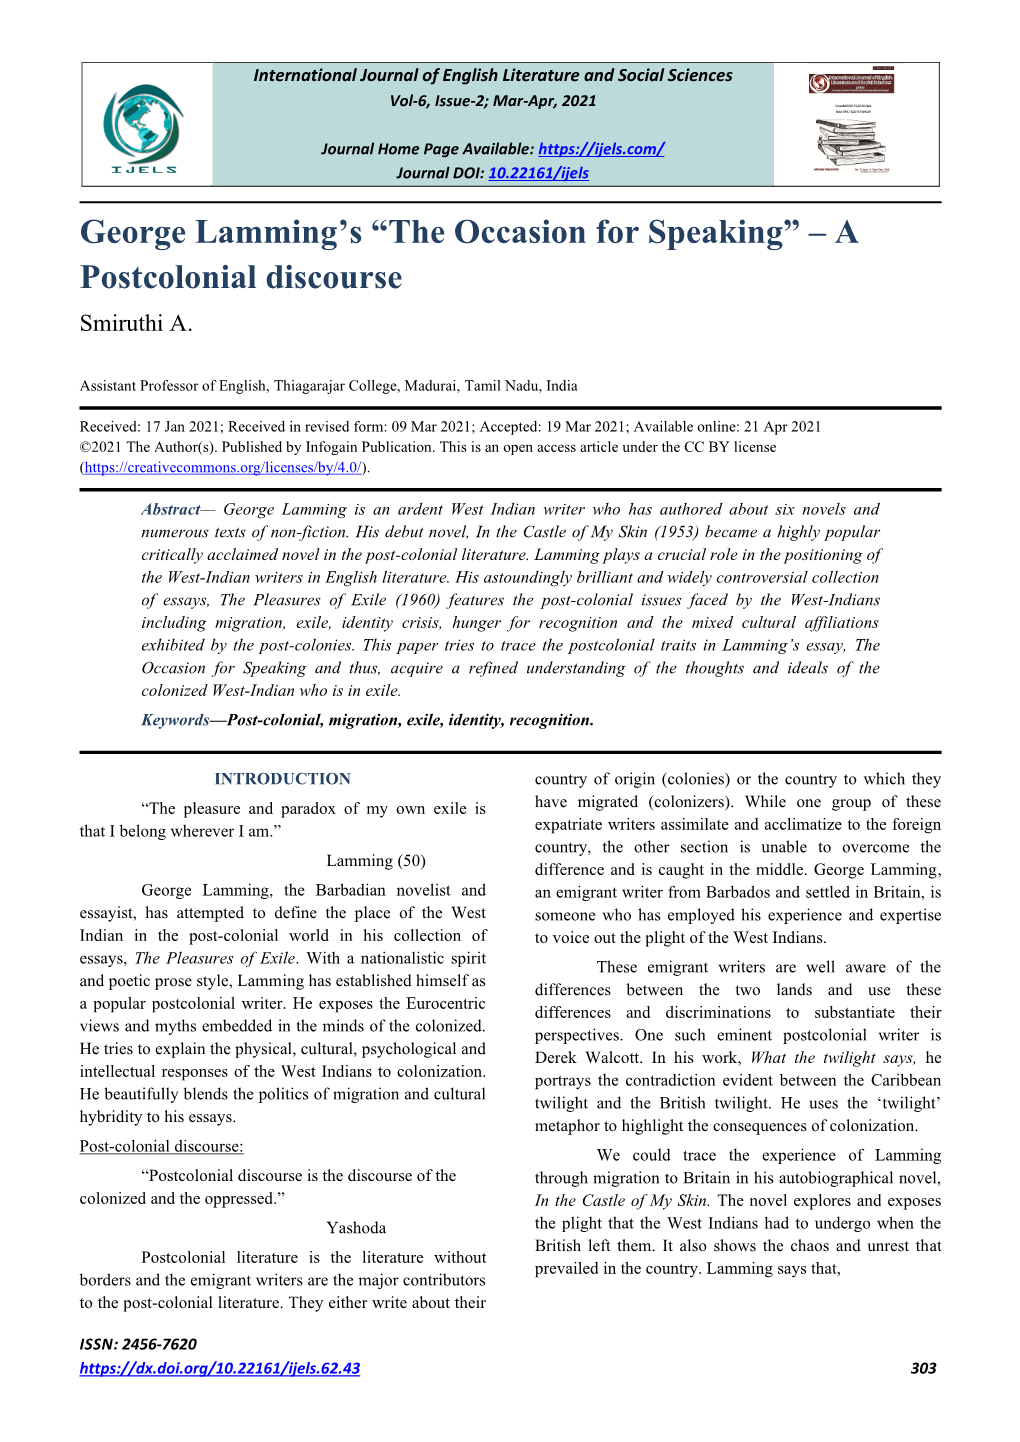 George Lamming's “The Occasion for Speaking” – a Postcolonial Discourse